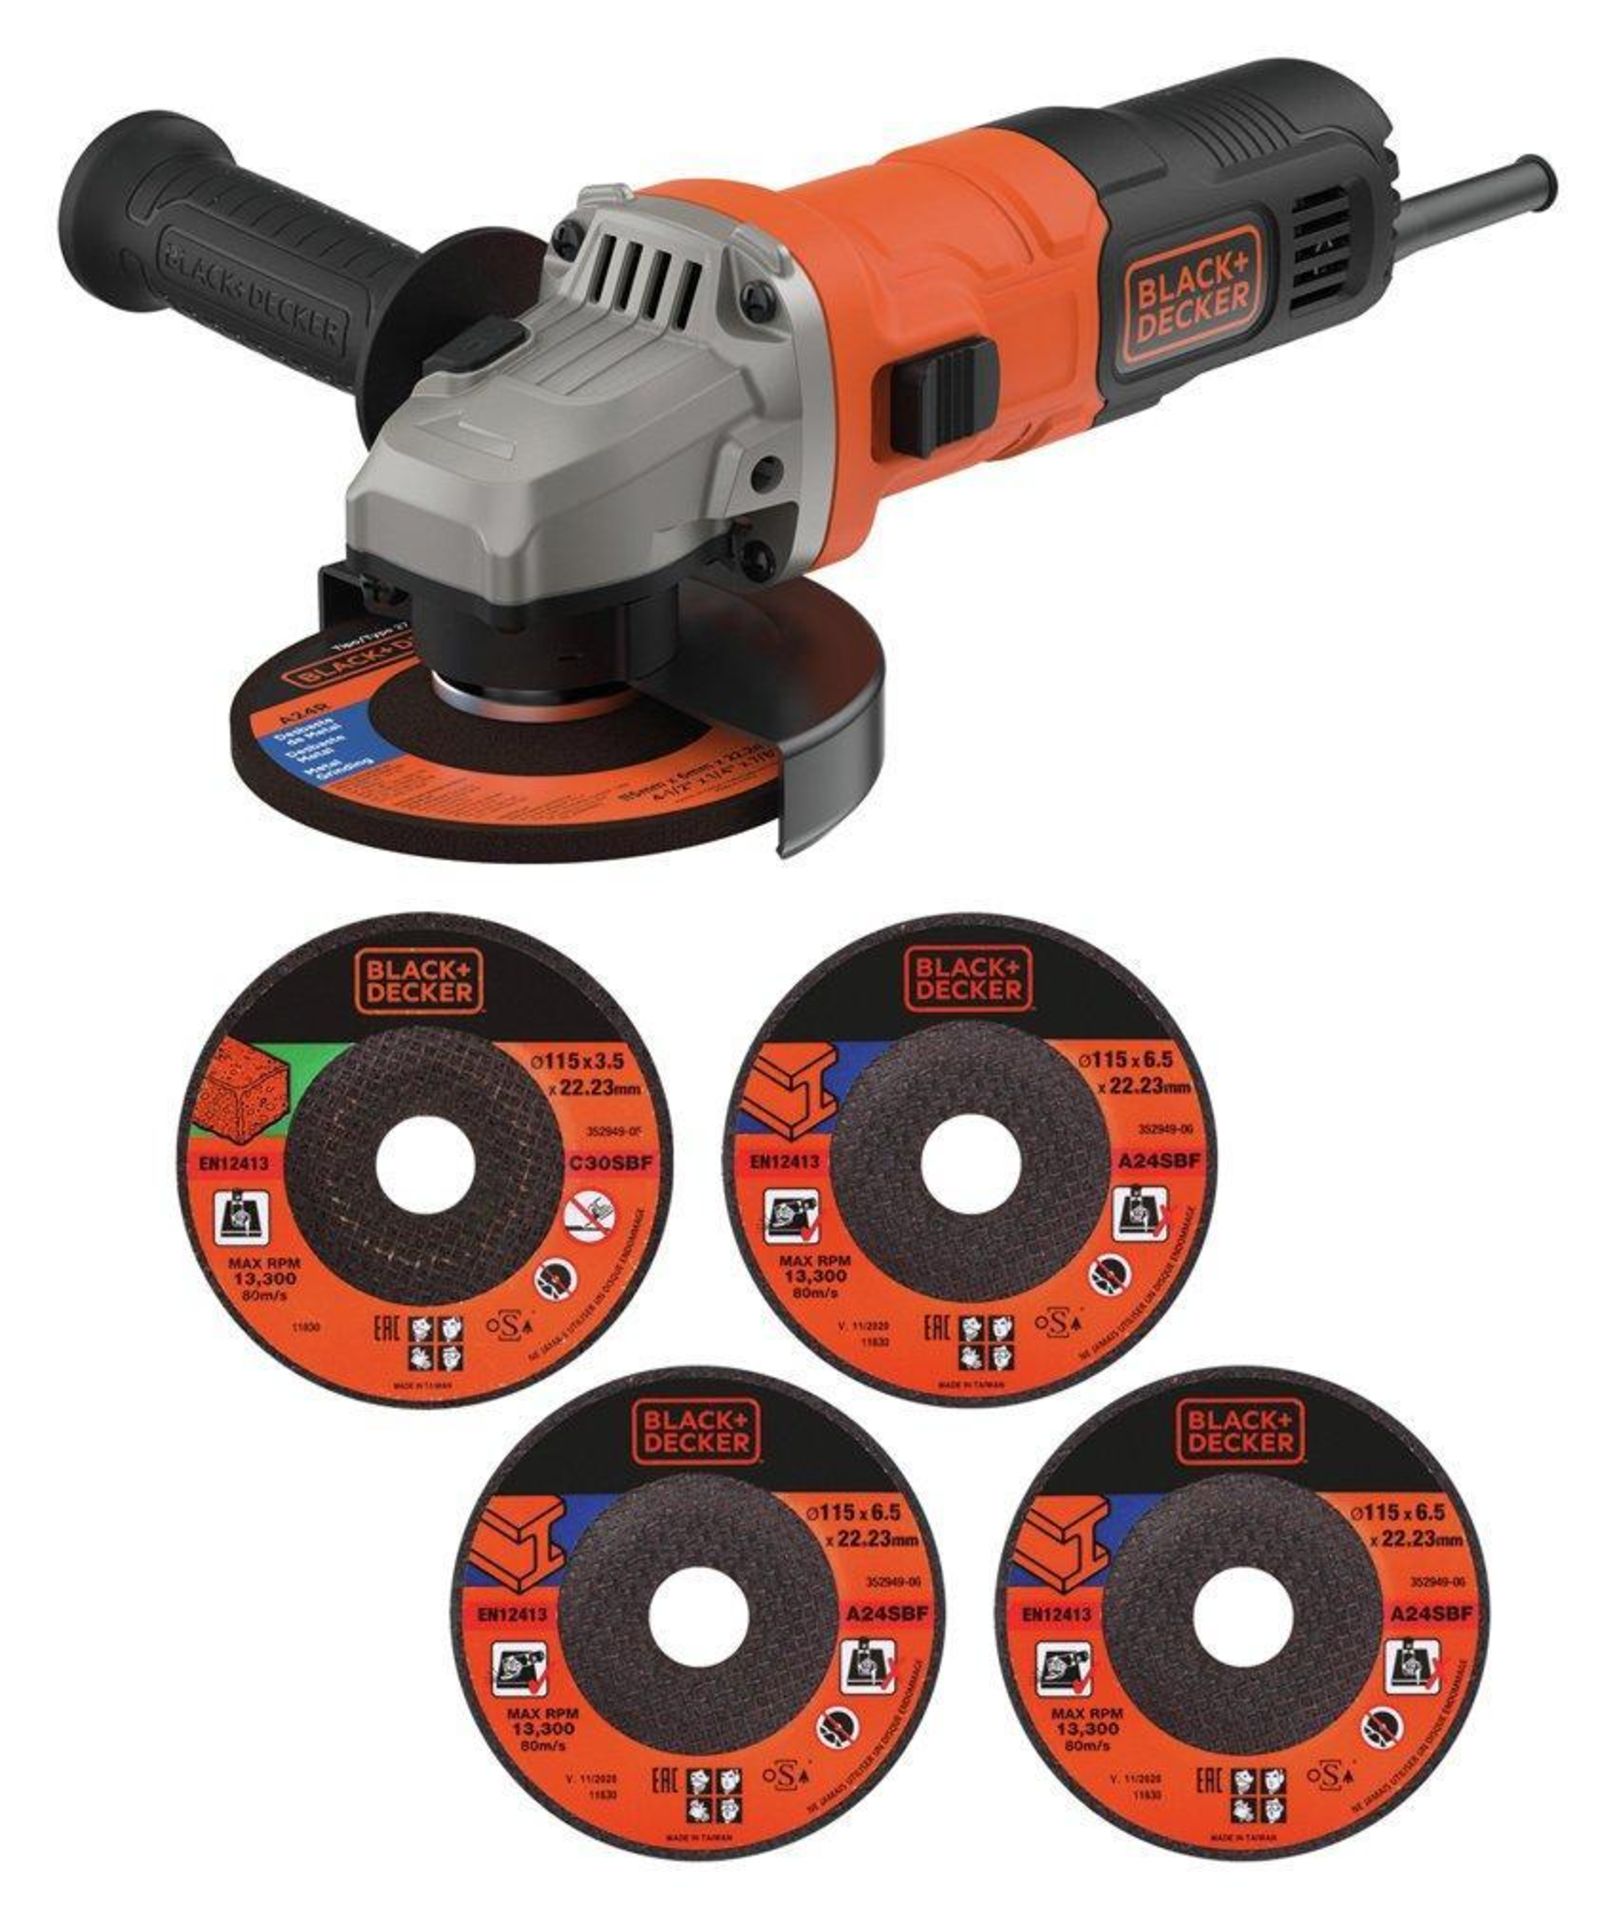 Black and Decker BEG010A5 Angle Grinder + 5 Discs 115mm - SR45The BEG010A5 is a 115mm (4 1/2") angle